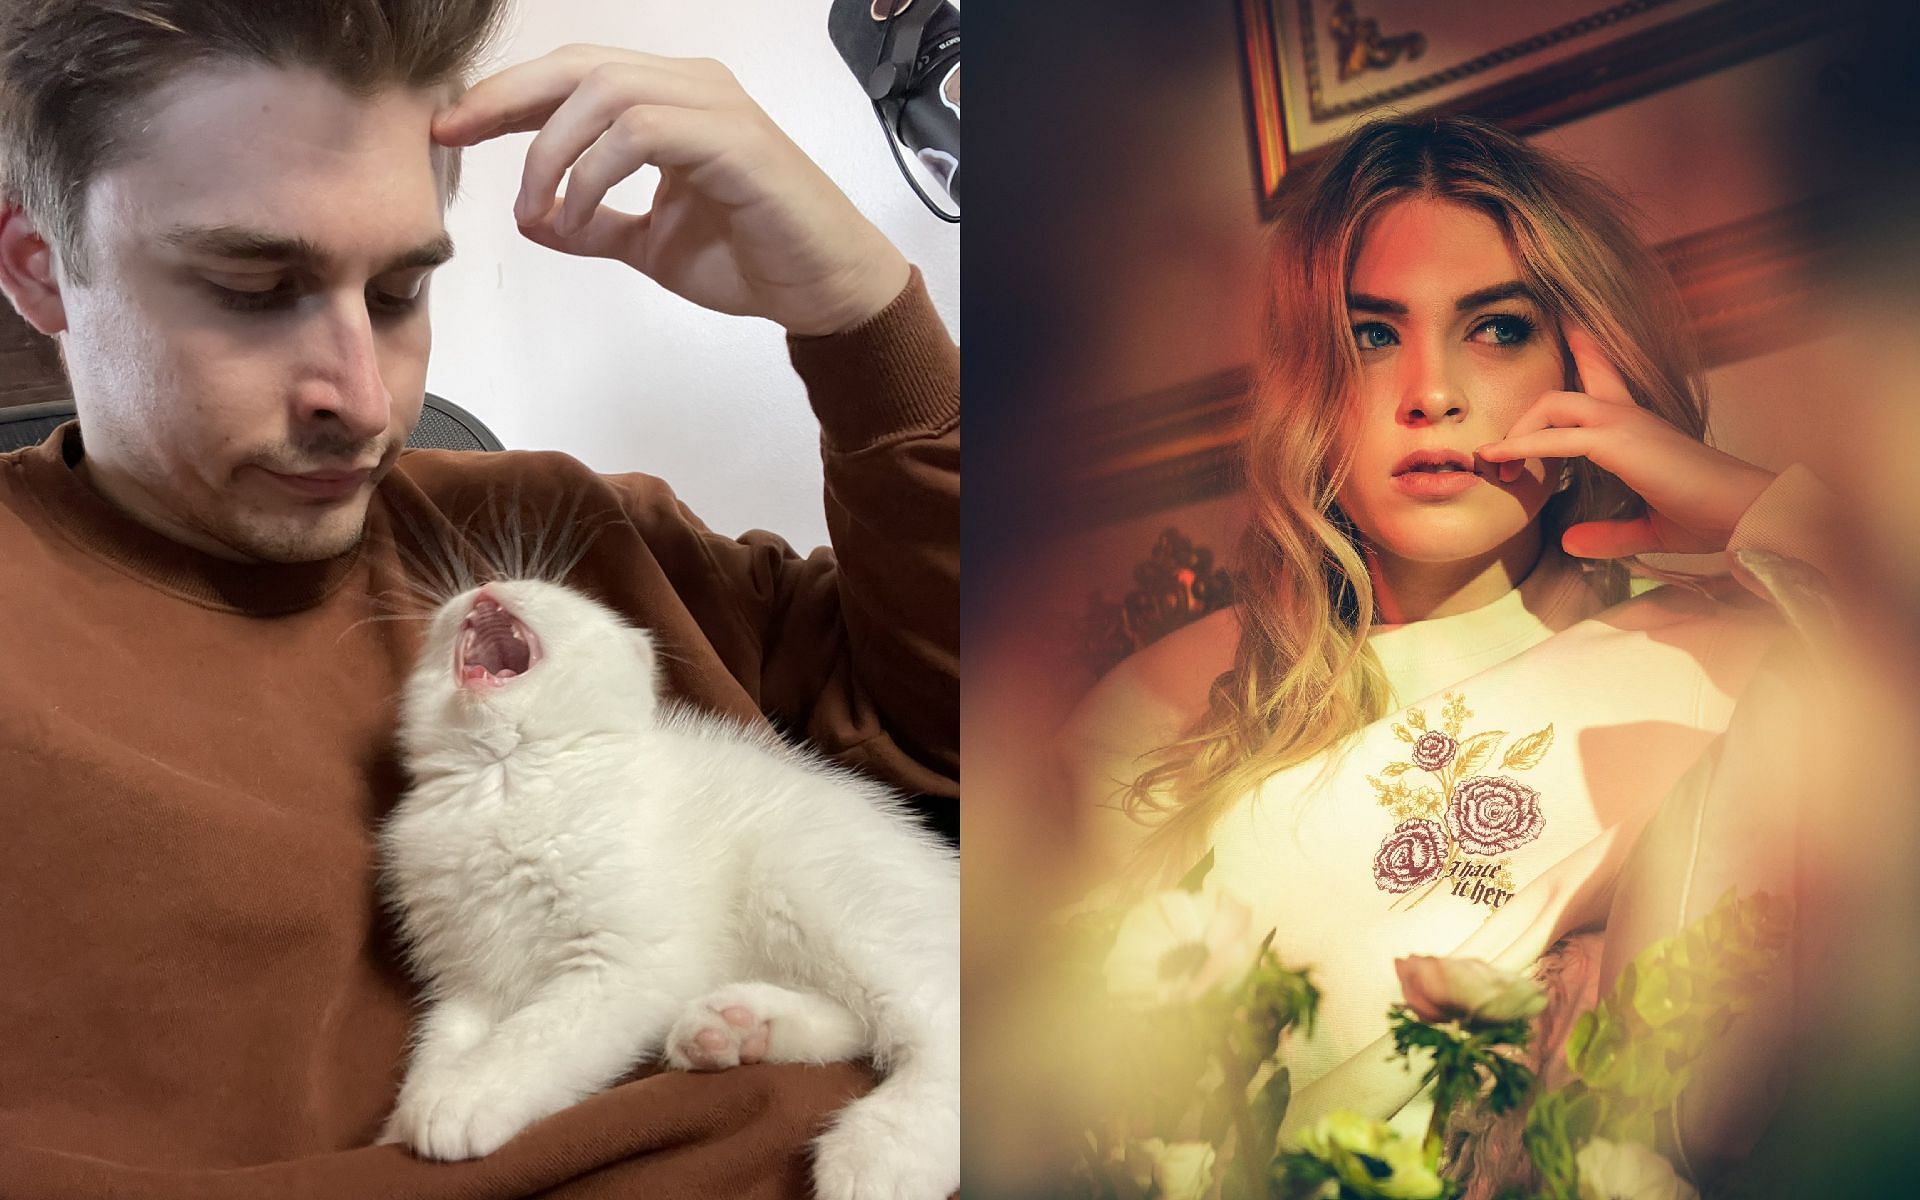 Ludwig calls QTCinderella on stream to suggest a few names for their new kitten (Images via LudwigAhgren and QTCinderella/Twitter)